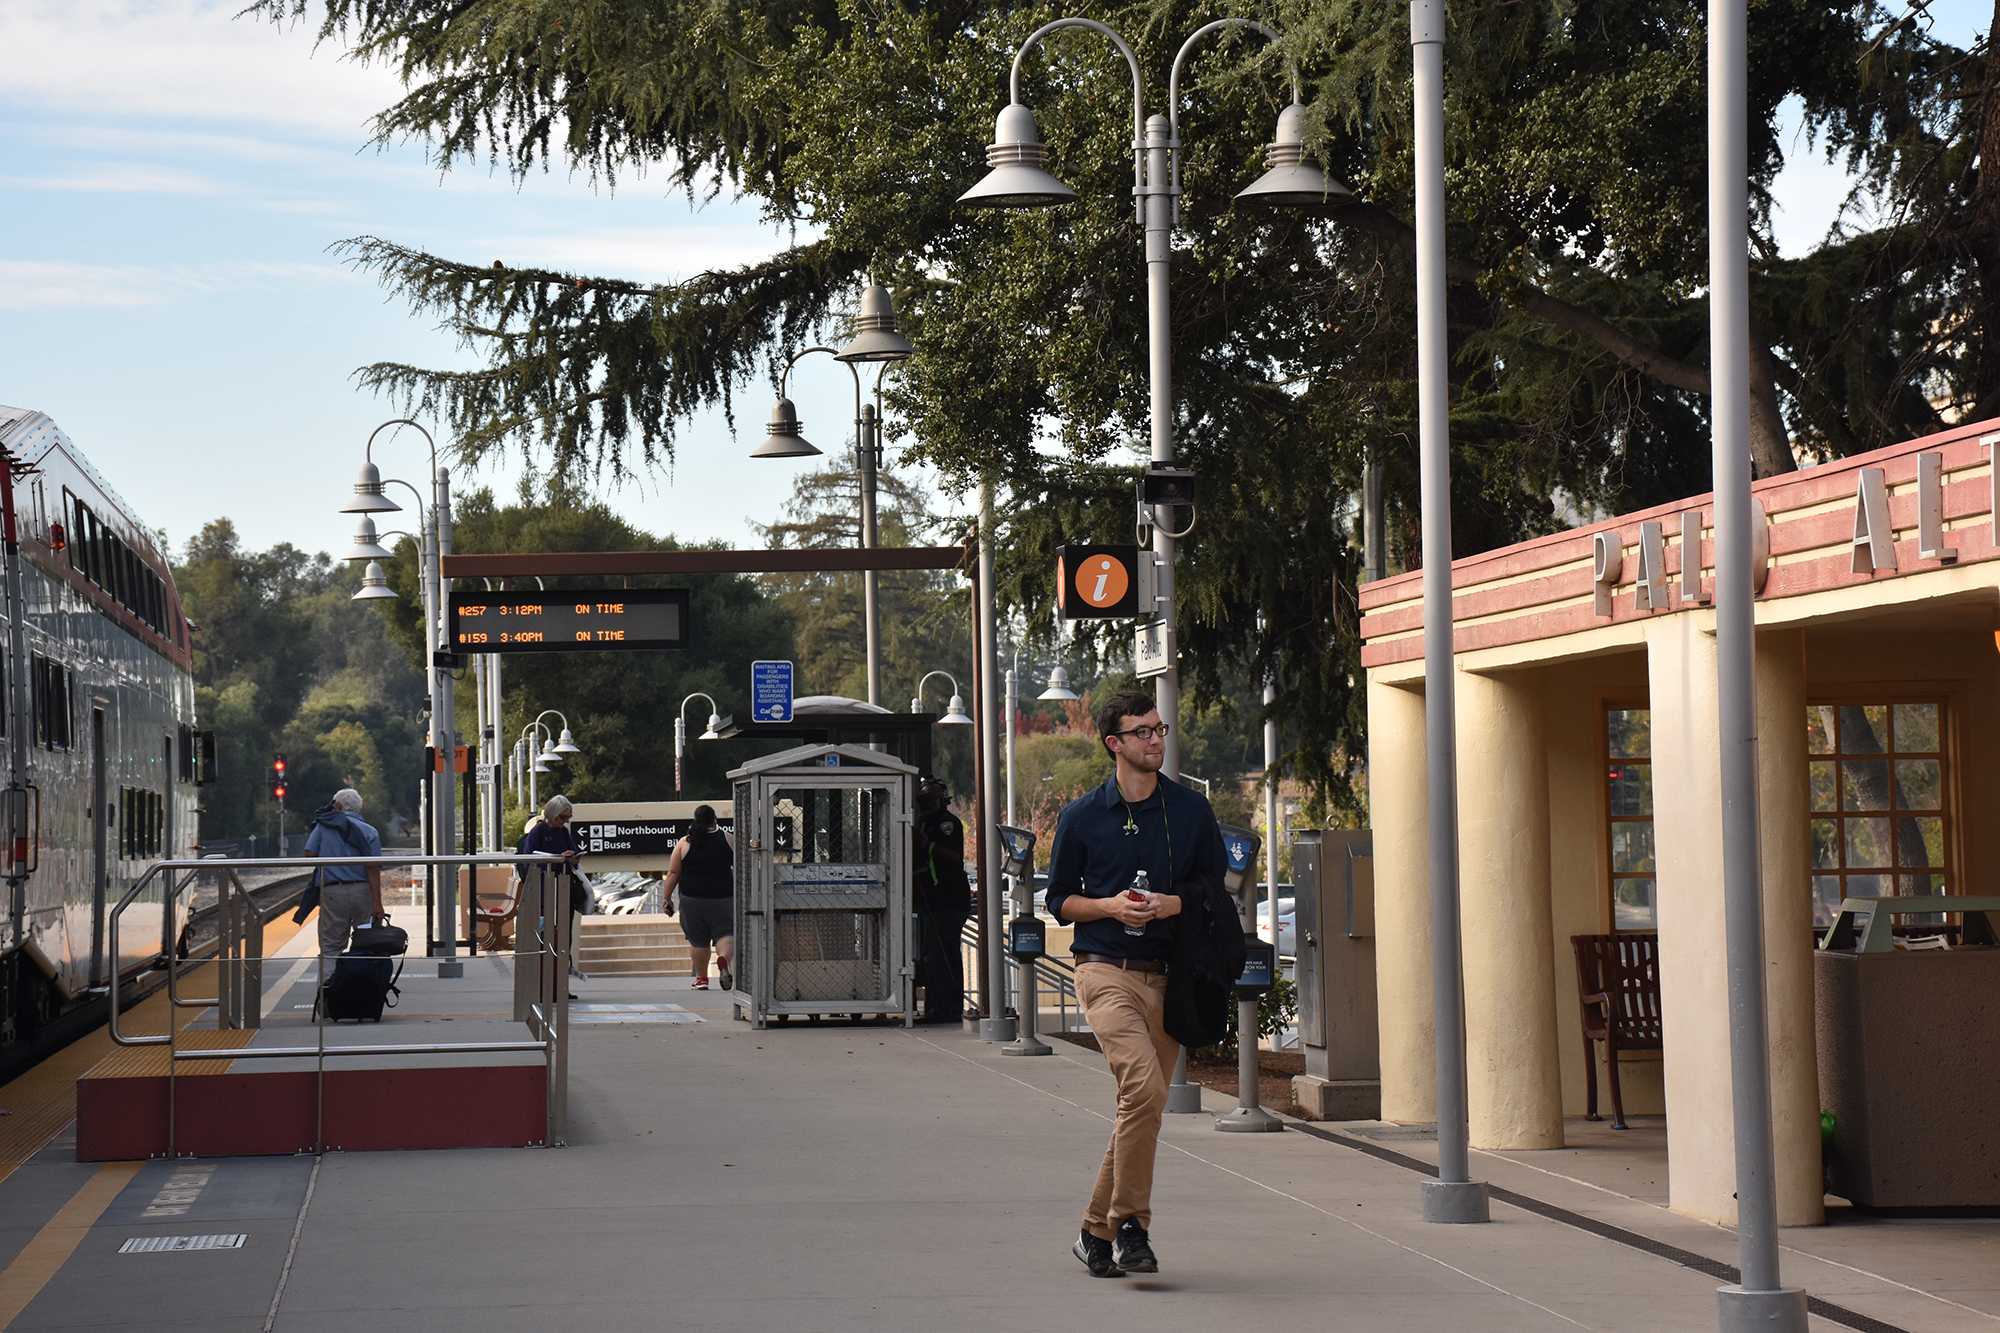 The CalTrain station near University Avenue provides a convenient stop for those employed Downtown or at Stanford University.